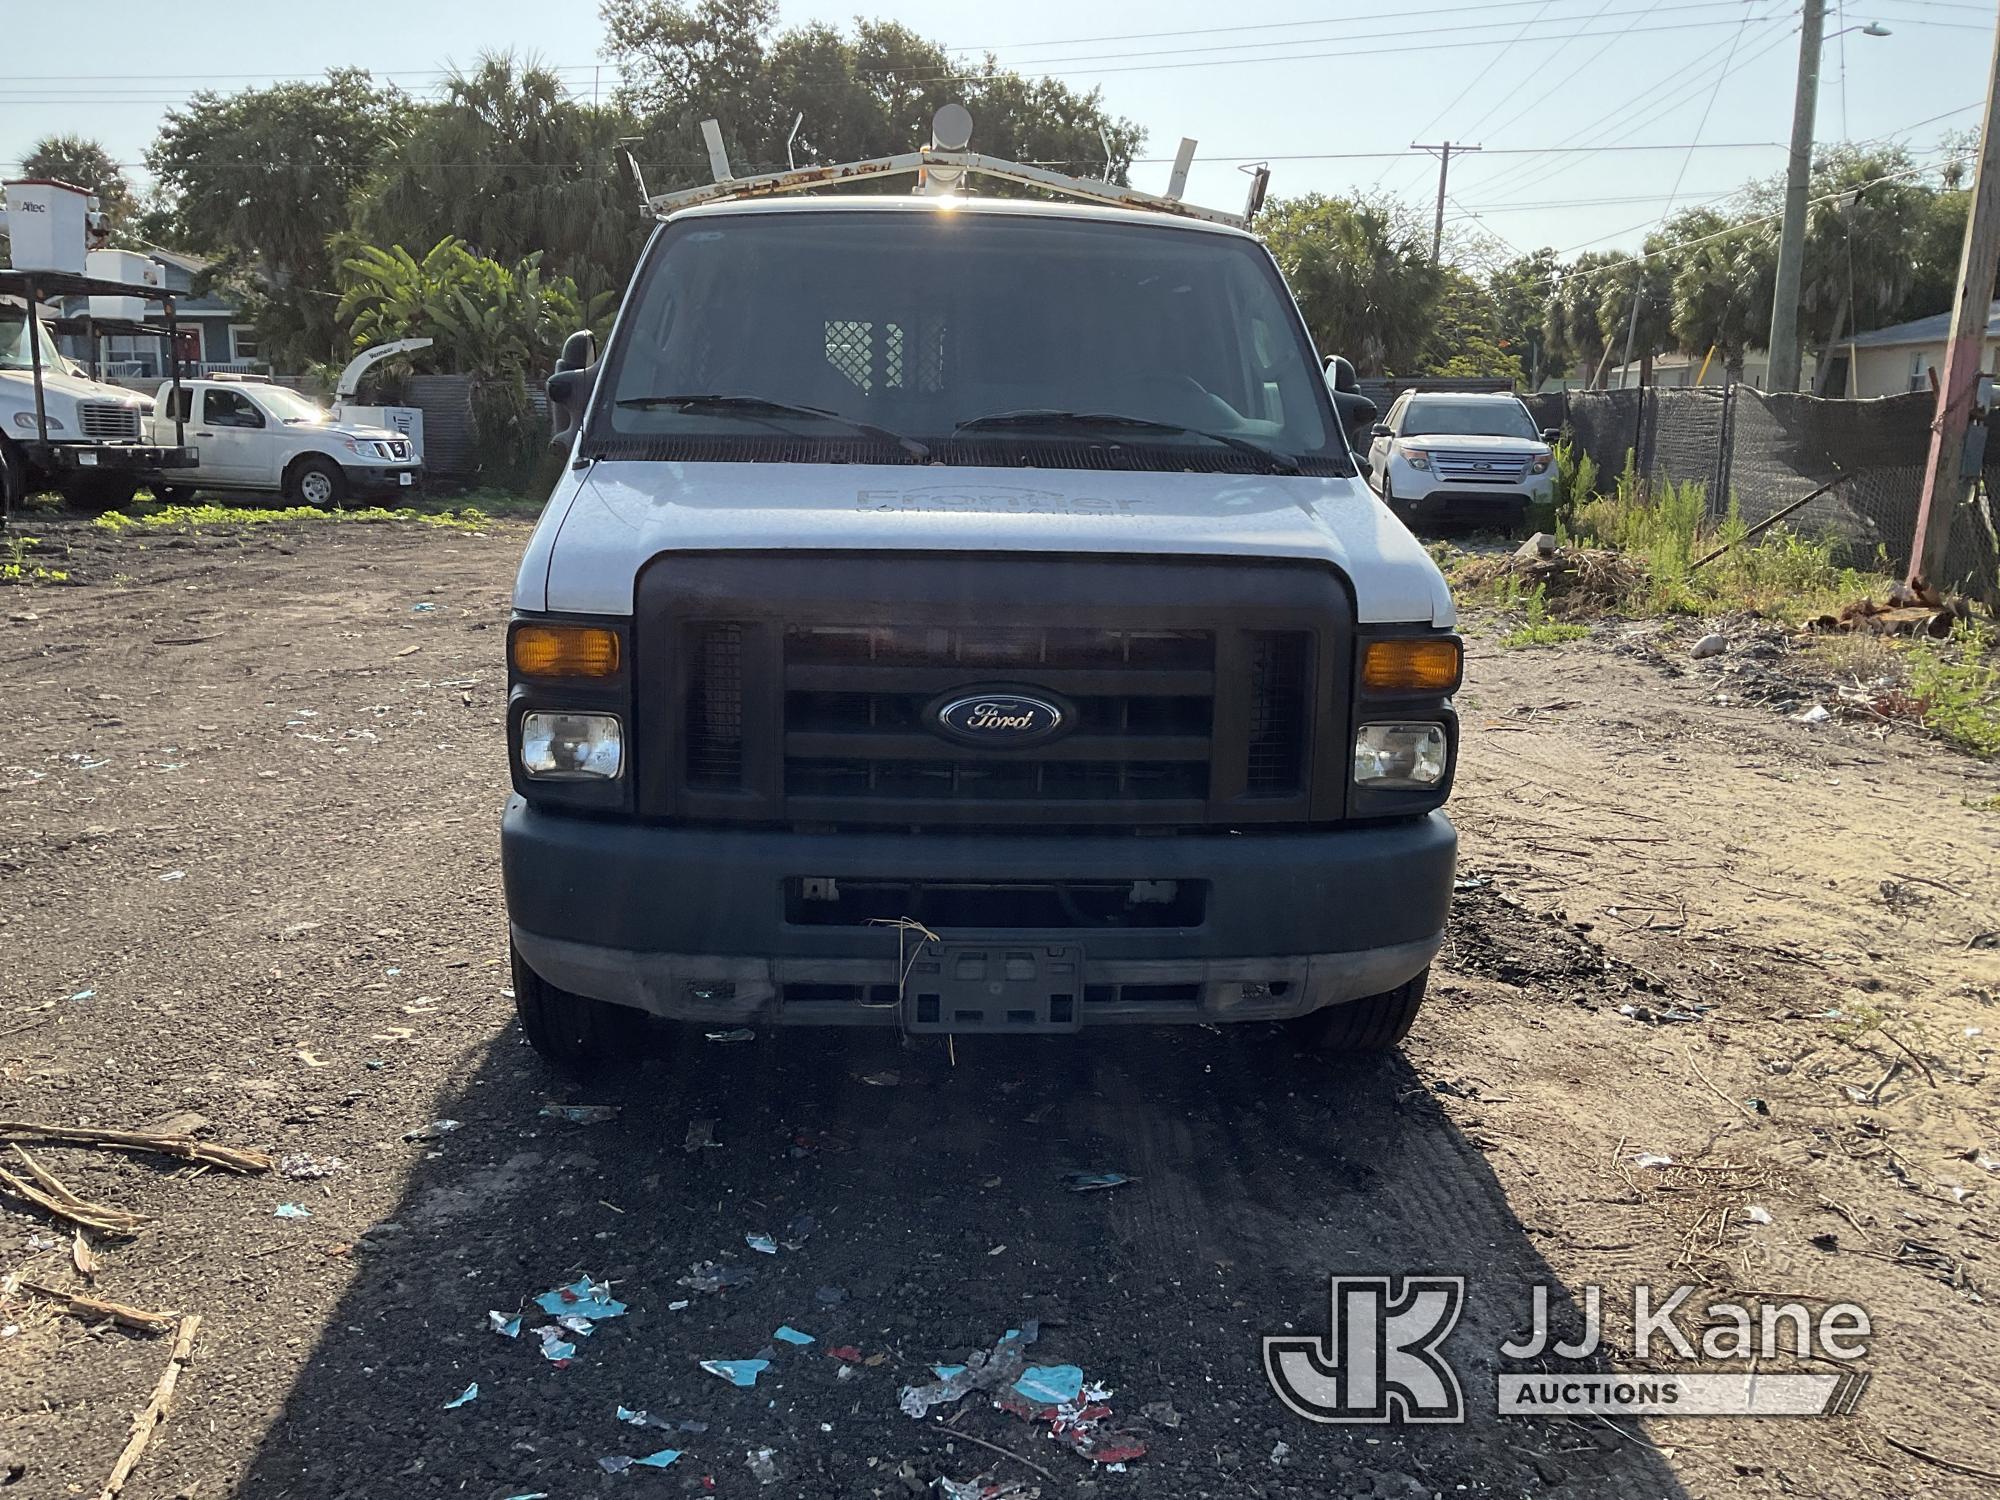 (Tampa, FL) 2010 Ford E250 Cargo Van Runs & Does Not Move) (Jump To Start, Will Not Shift From Park